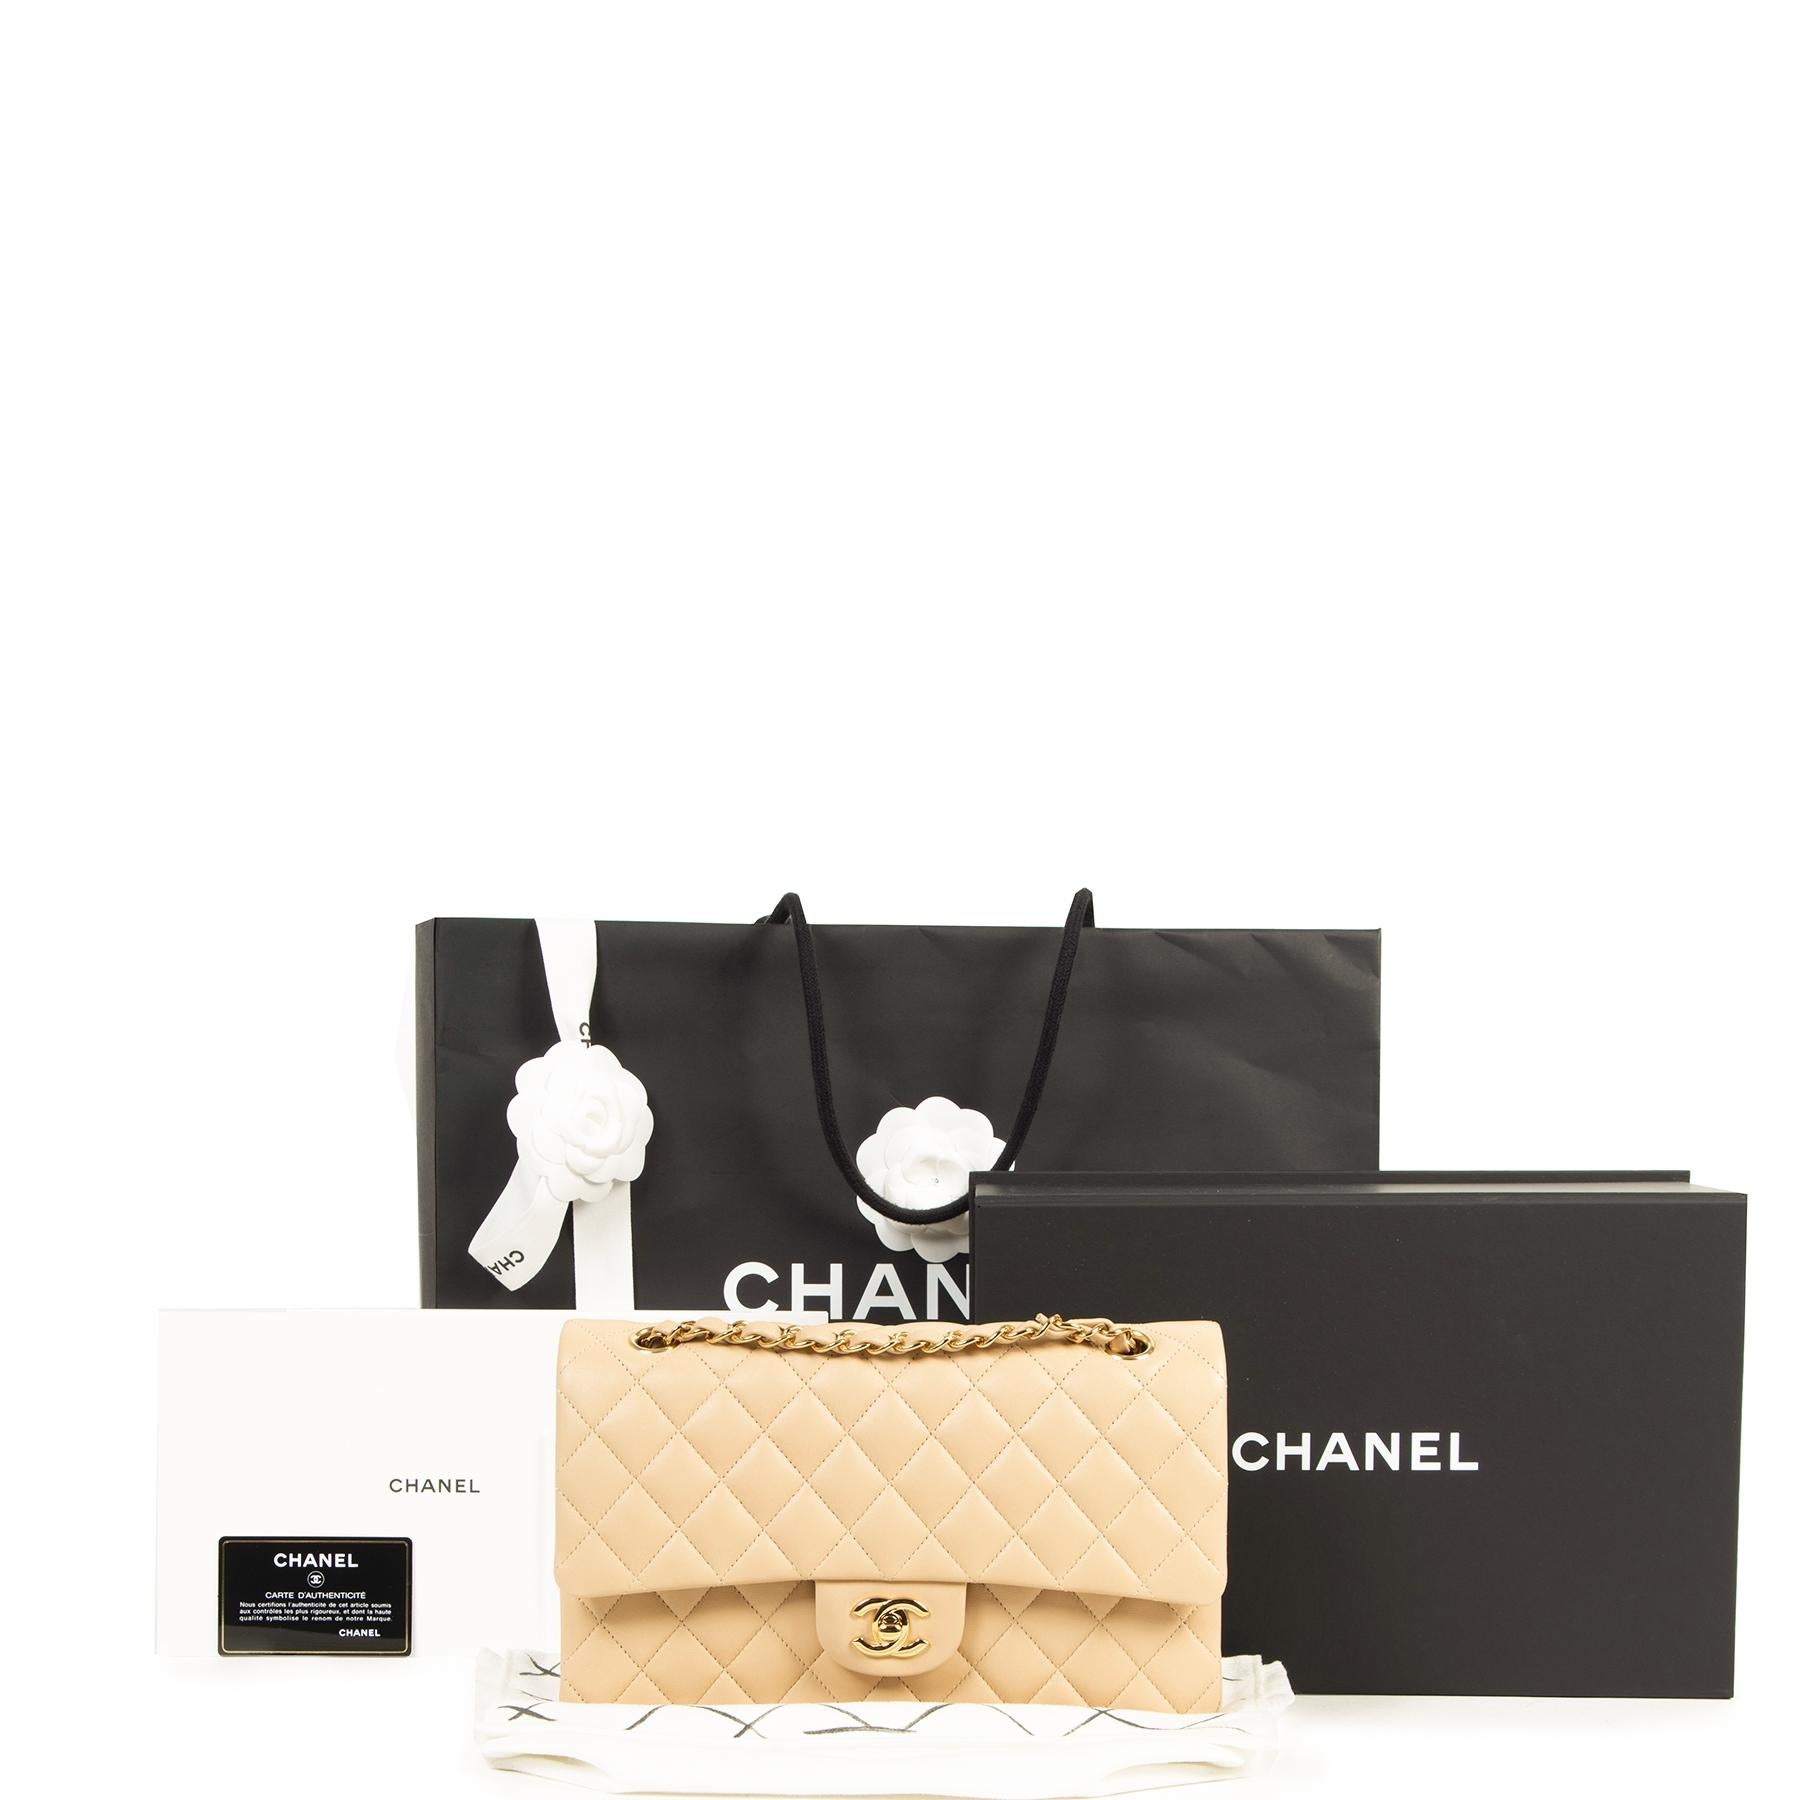 Brand new, never worn

Chanel Medium Classic Flap Bag Nude GHW

The epitome of chic wrapped in one bag: the Chanel Medium Classic Flap Bag in nude calfskin leather is everything your heart desires.

This beauty has fabulous gold-toned hardware and